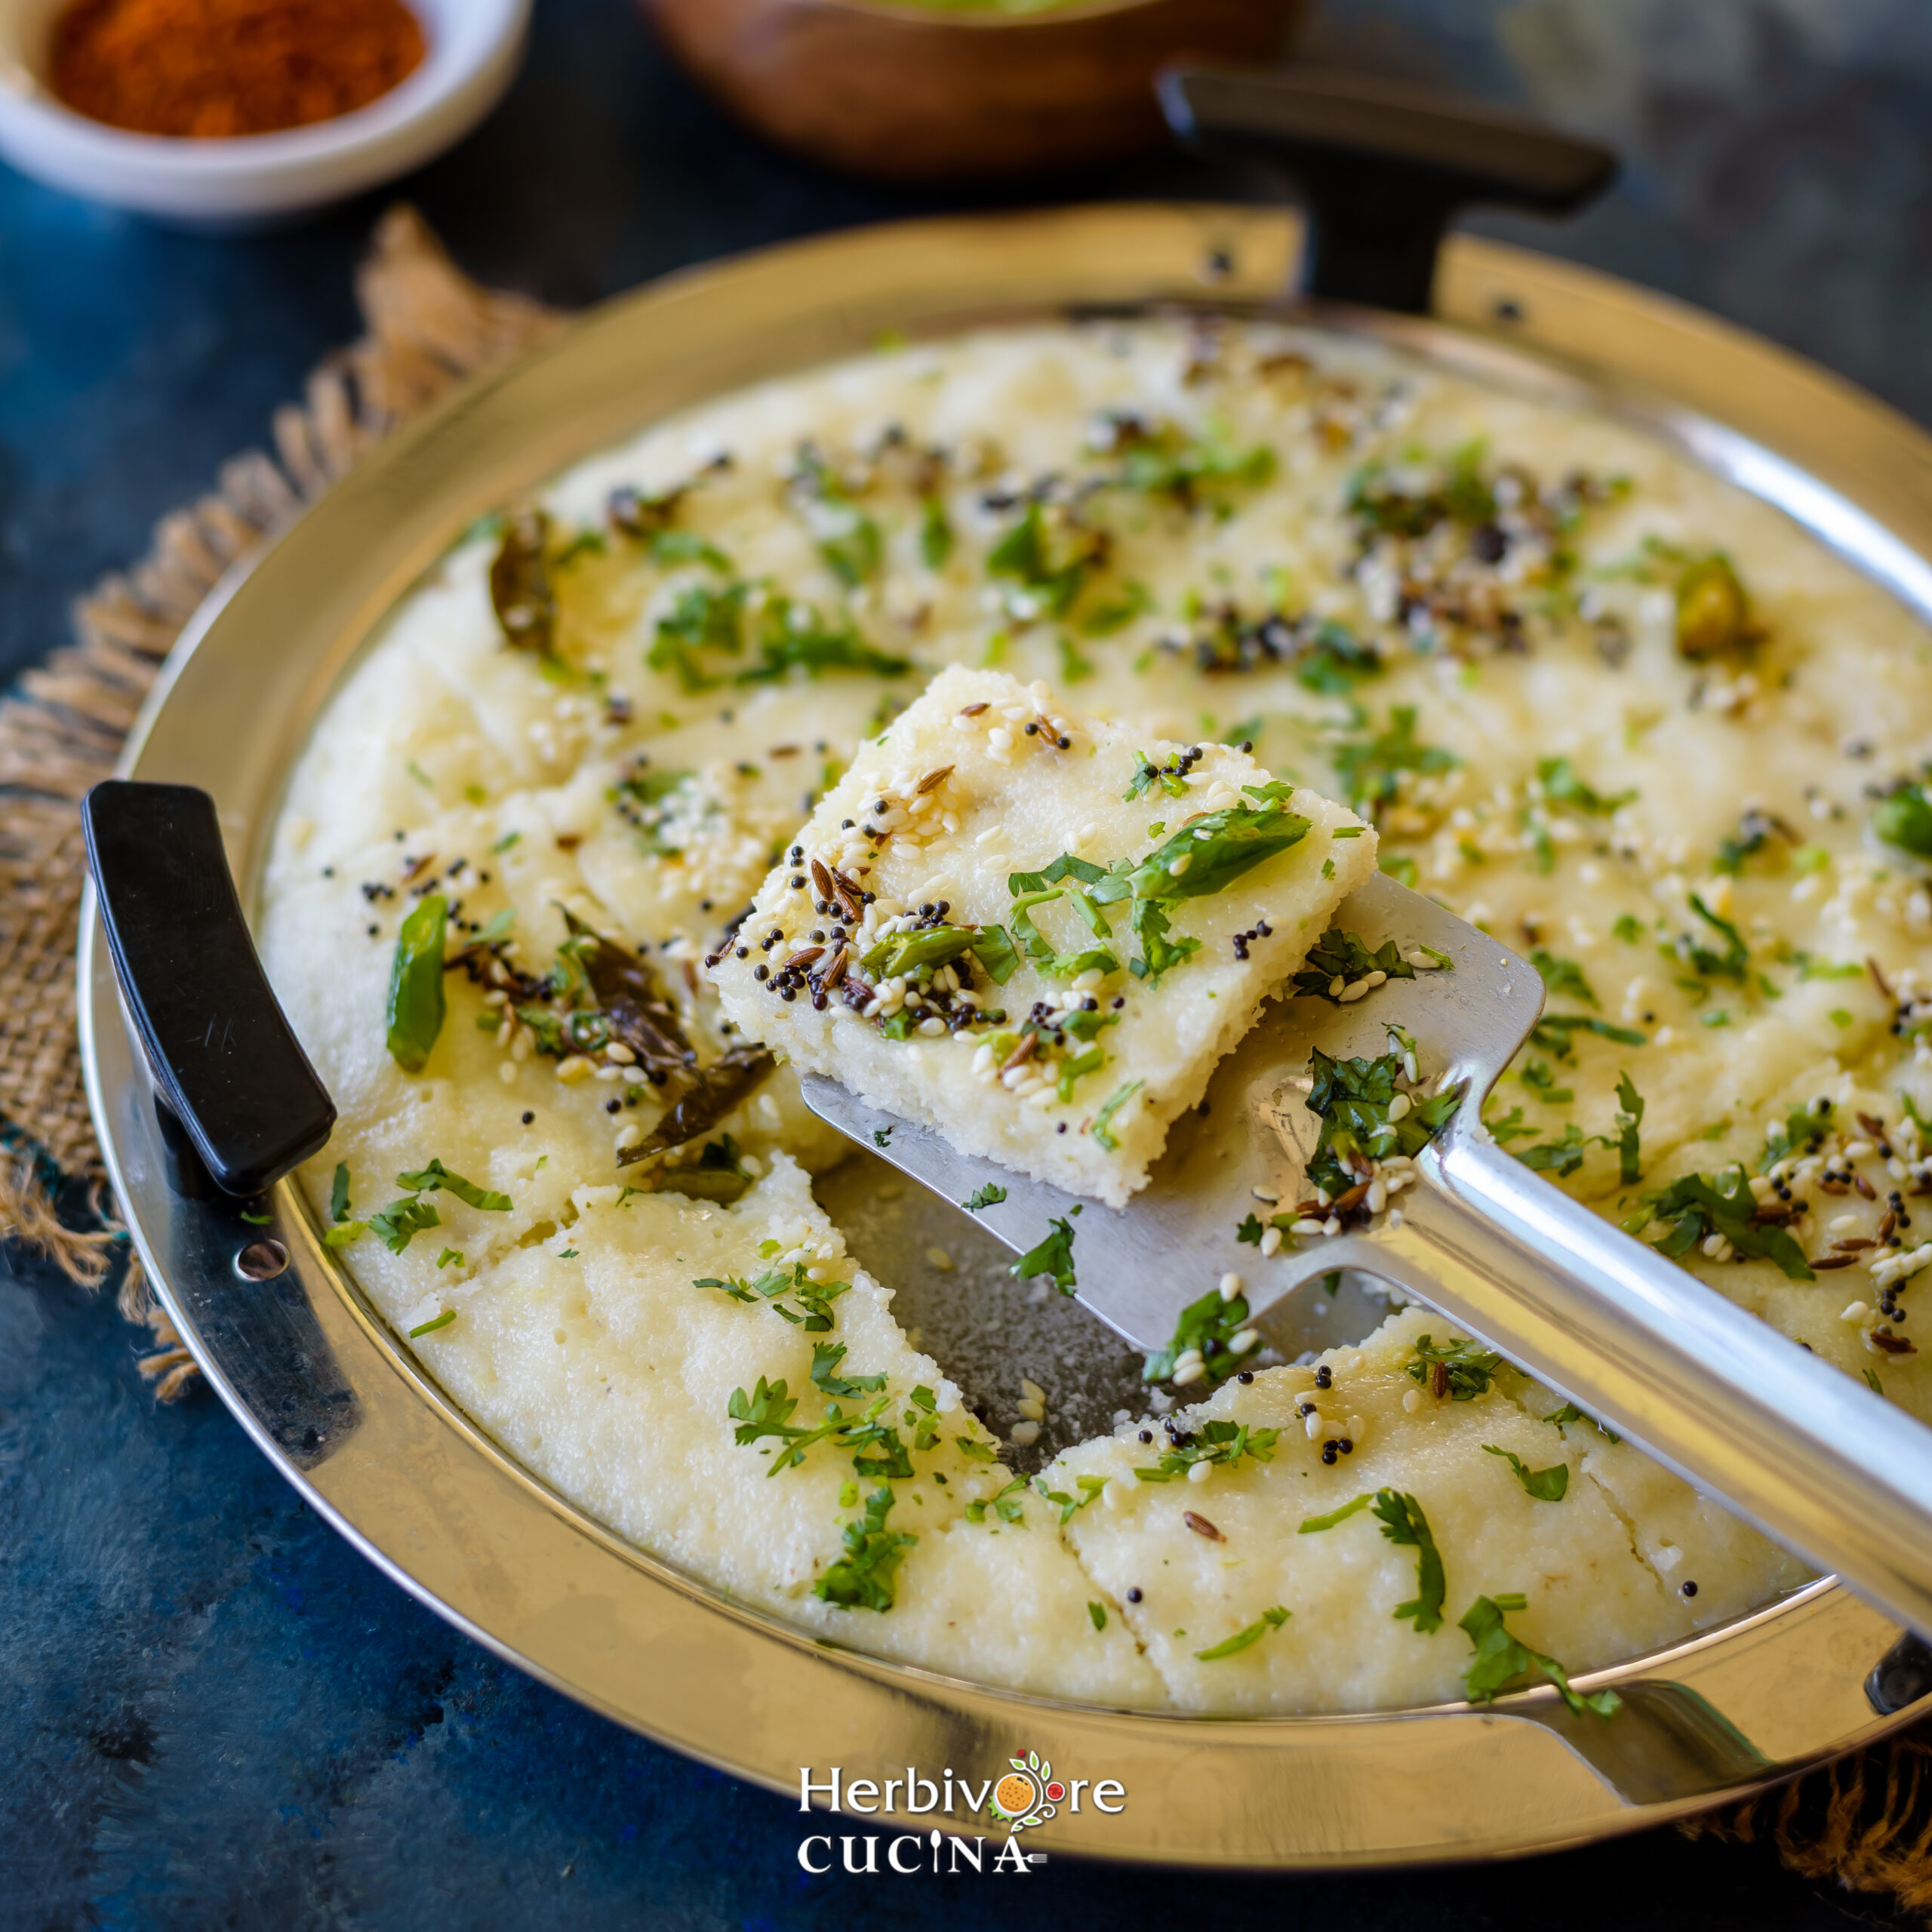 Steps to make rava dhokla; add tempering to dhokla and cut into squares. Serve with chutney. 